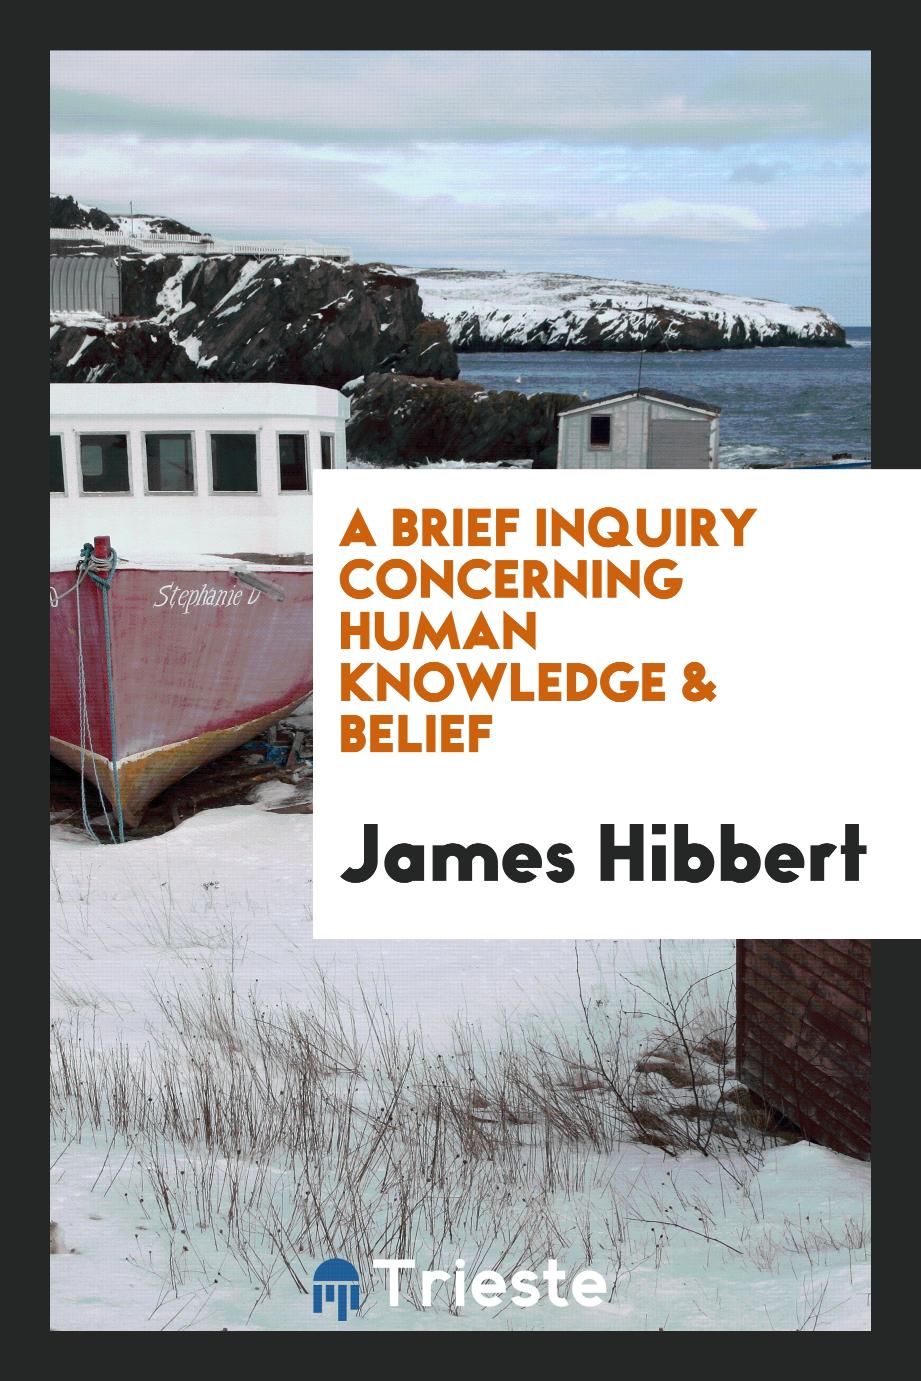 A brief inquiry concerning human knowledge & belief